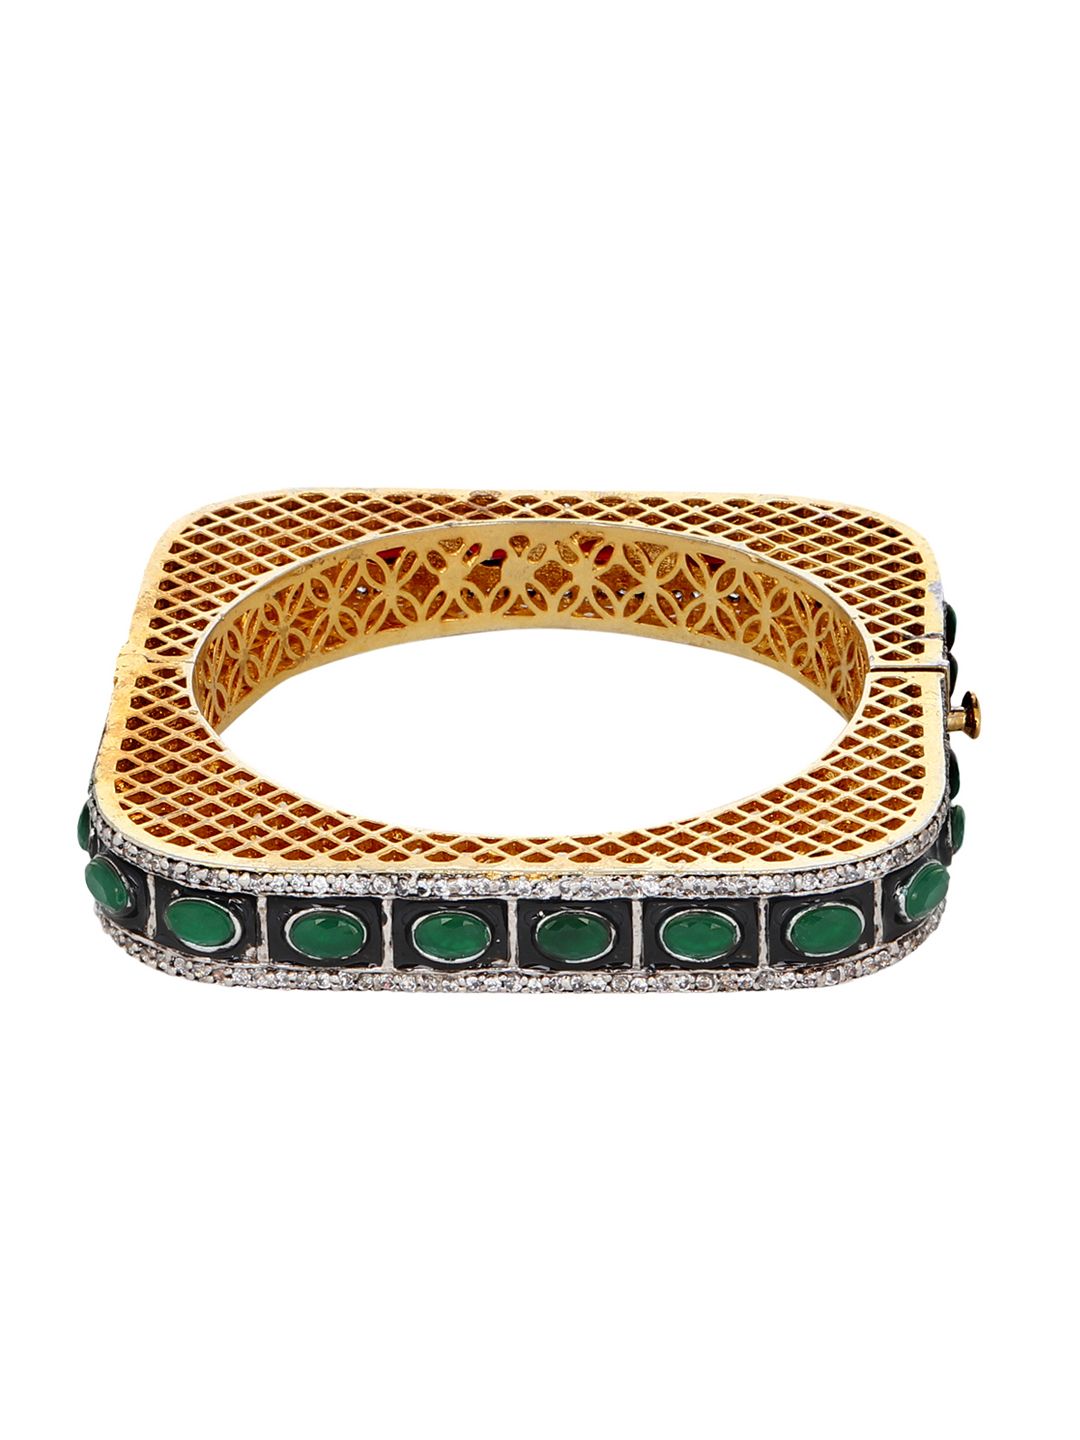 Adwitiya Collection Gold-Plated Antique Kada Bracelet Price in India